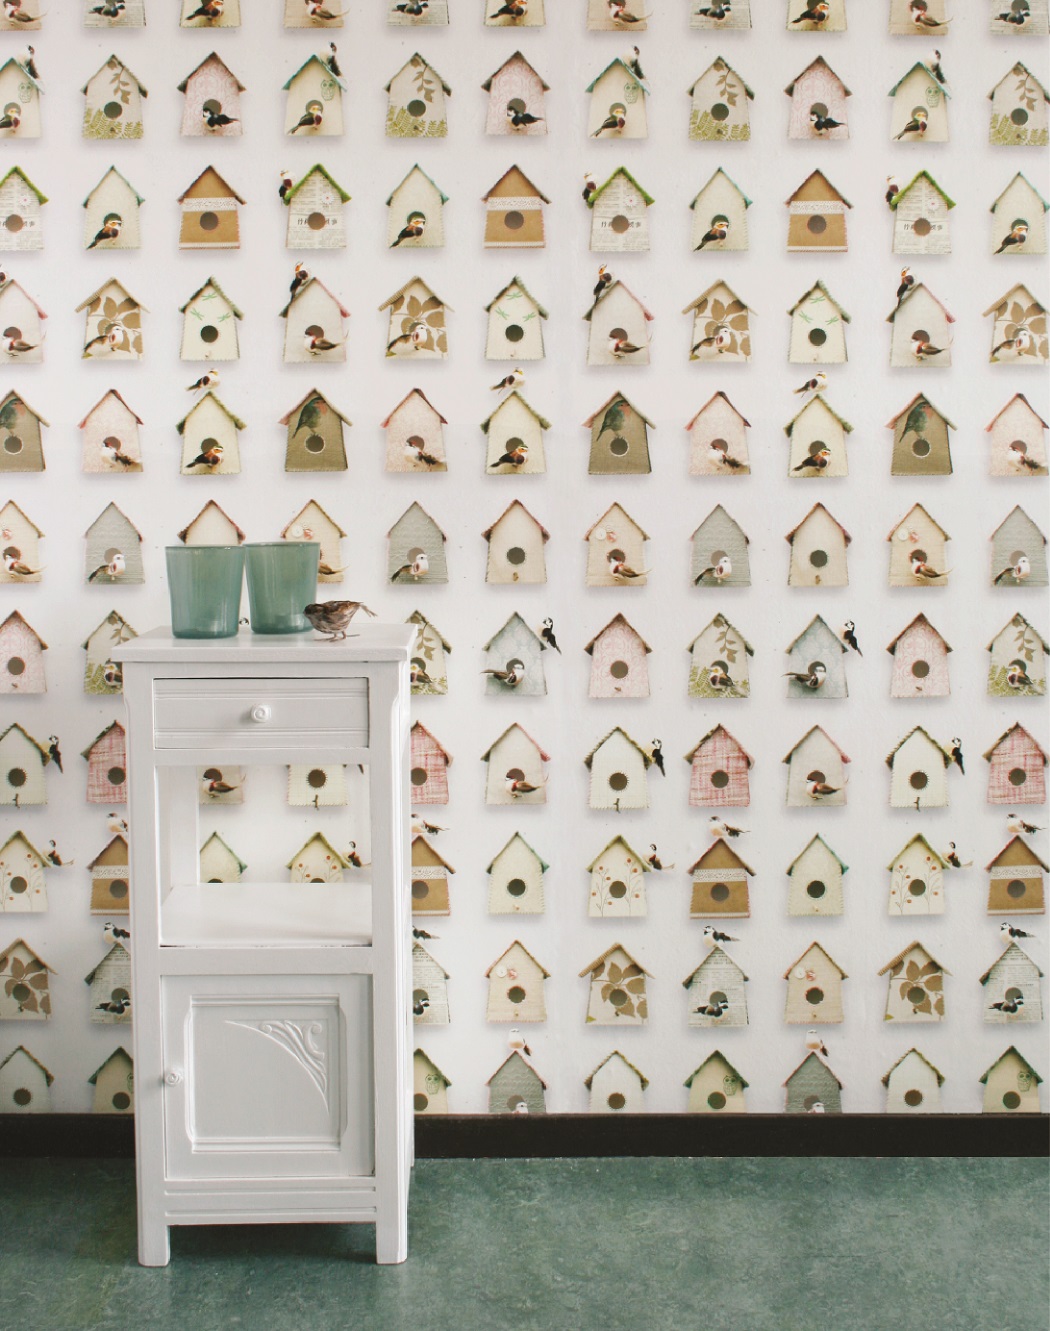 Adorable birdhouse-print wallpaper by The Pattern Collective.